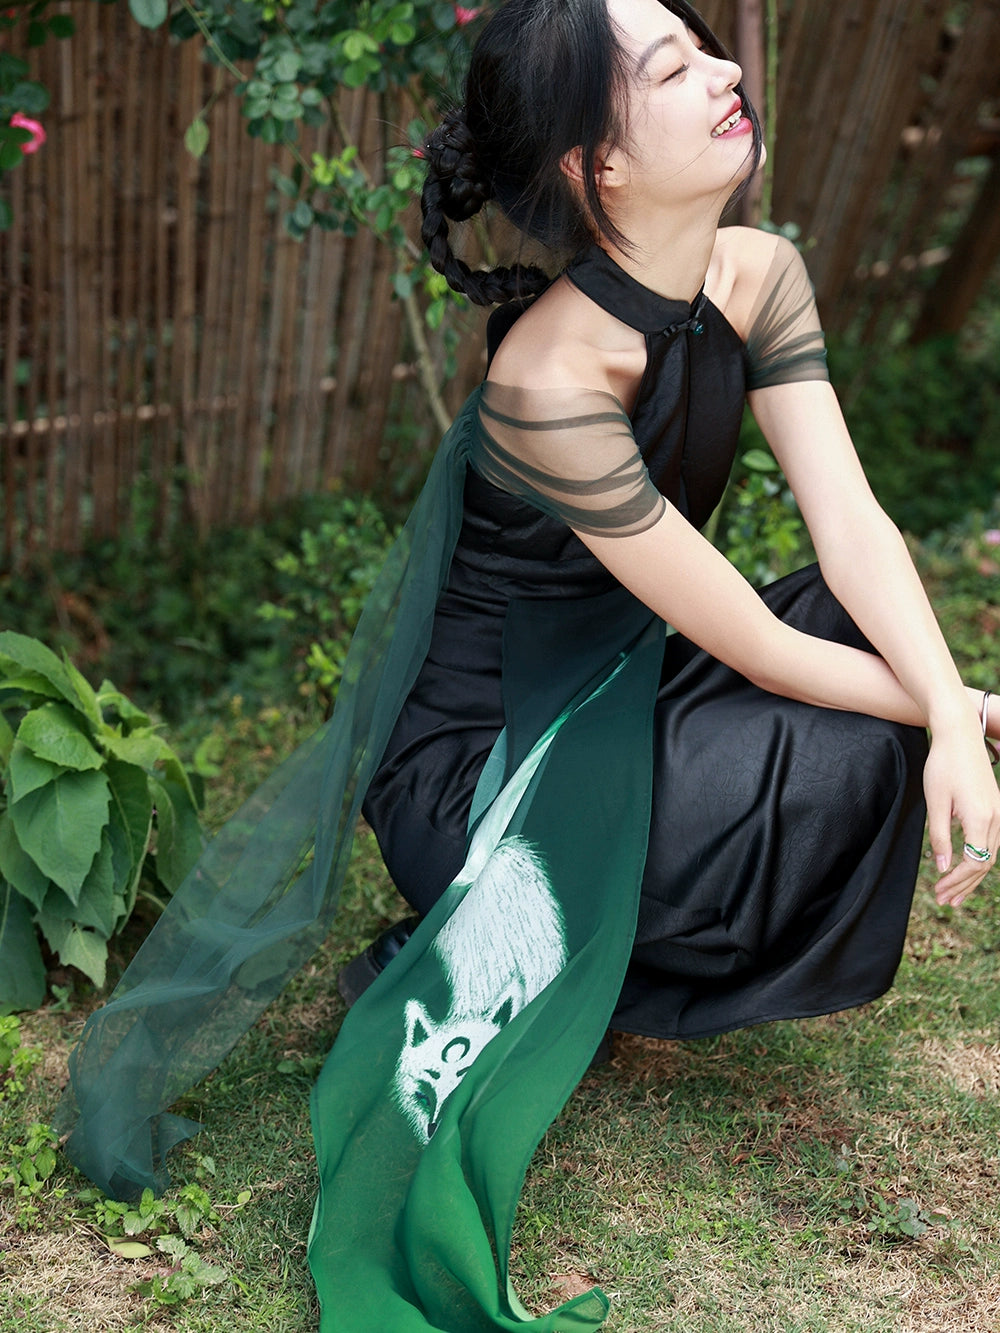 Discover our exquisite collection of cheongsam dresses, including elegant black cheongsam dress, vibrant green cheongsam, and luxurious silk cheongsam. Our range features both long cheongsam and chic mini cheongsam dress options, perfect for formal events and casual outings